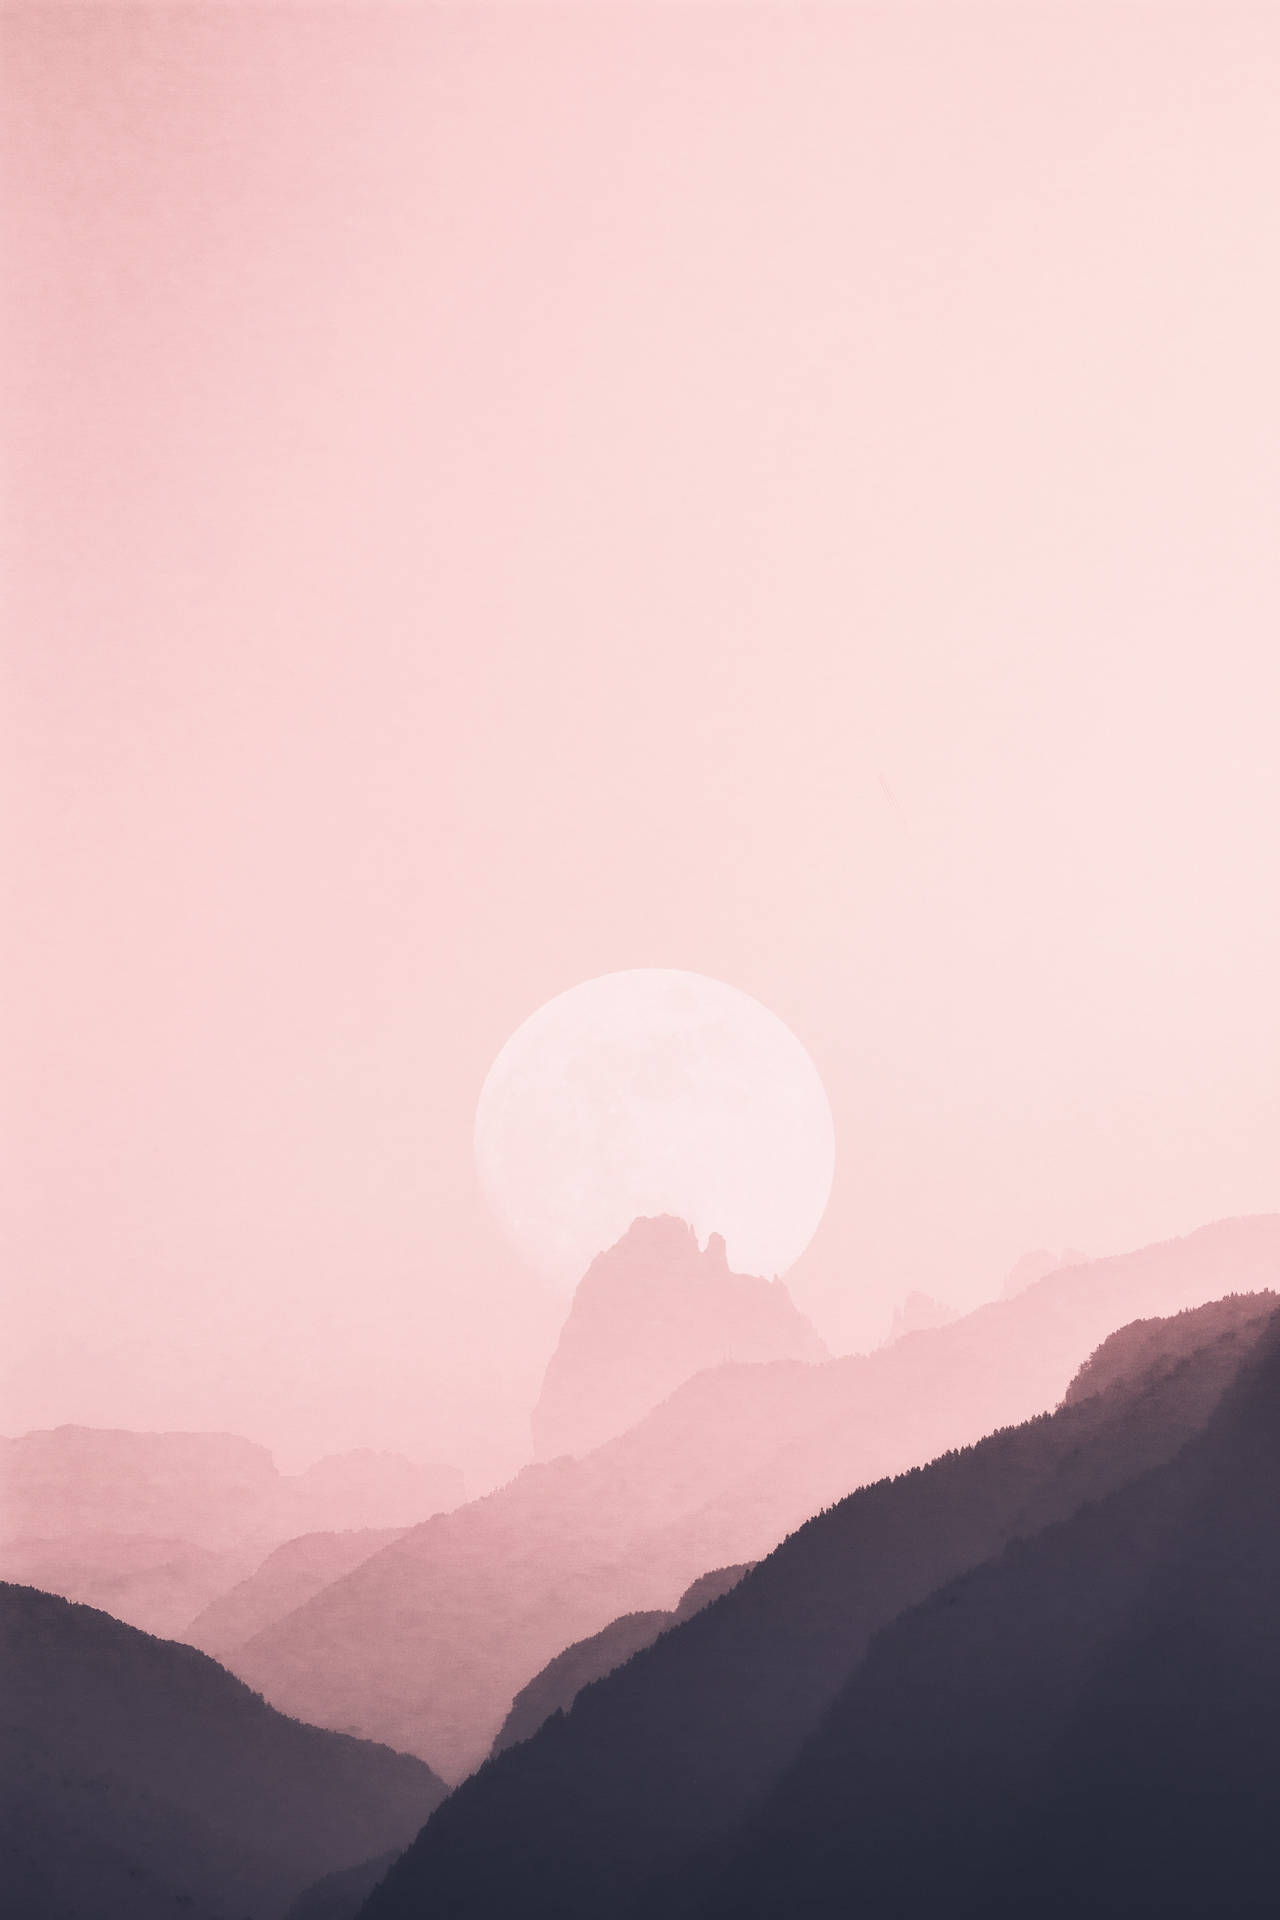 The beauty of a full moon reflecting in a peaceful, pastel sky Wallpaper